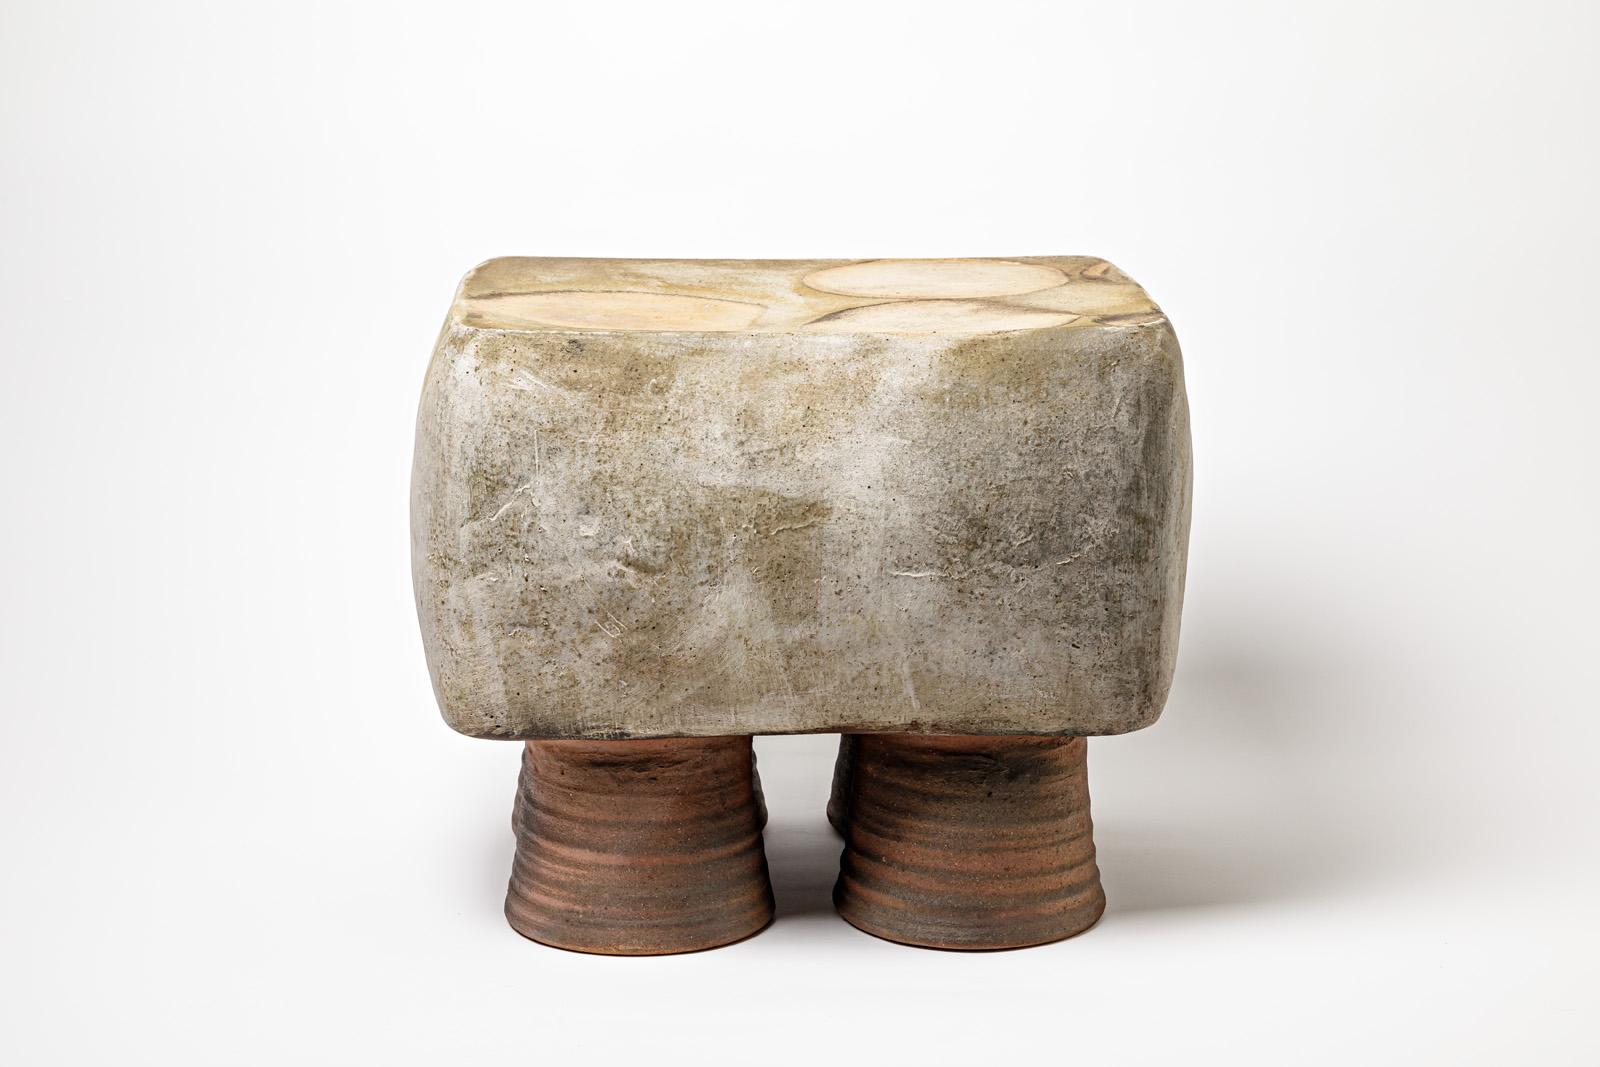 Wood fired ceramic stool or coffee table by Mia Jensen. 
Artist signature under the base. 2023.
H : 15.7’ x 18.1’ x 15.7’ inches.